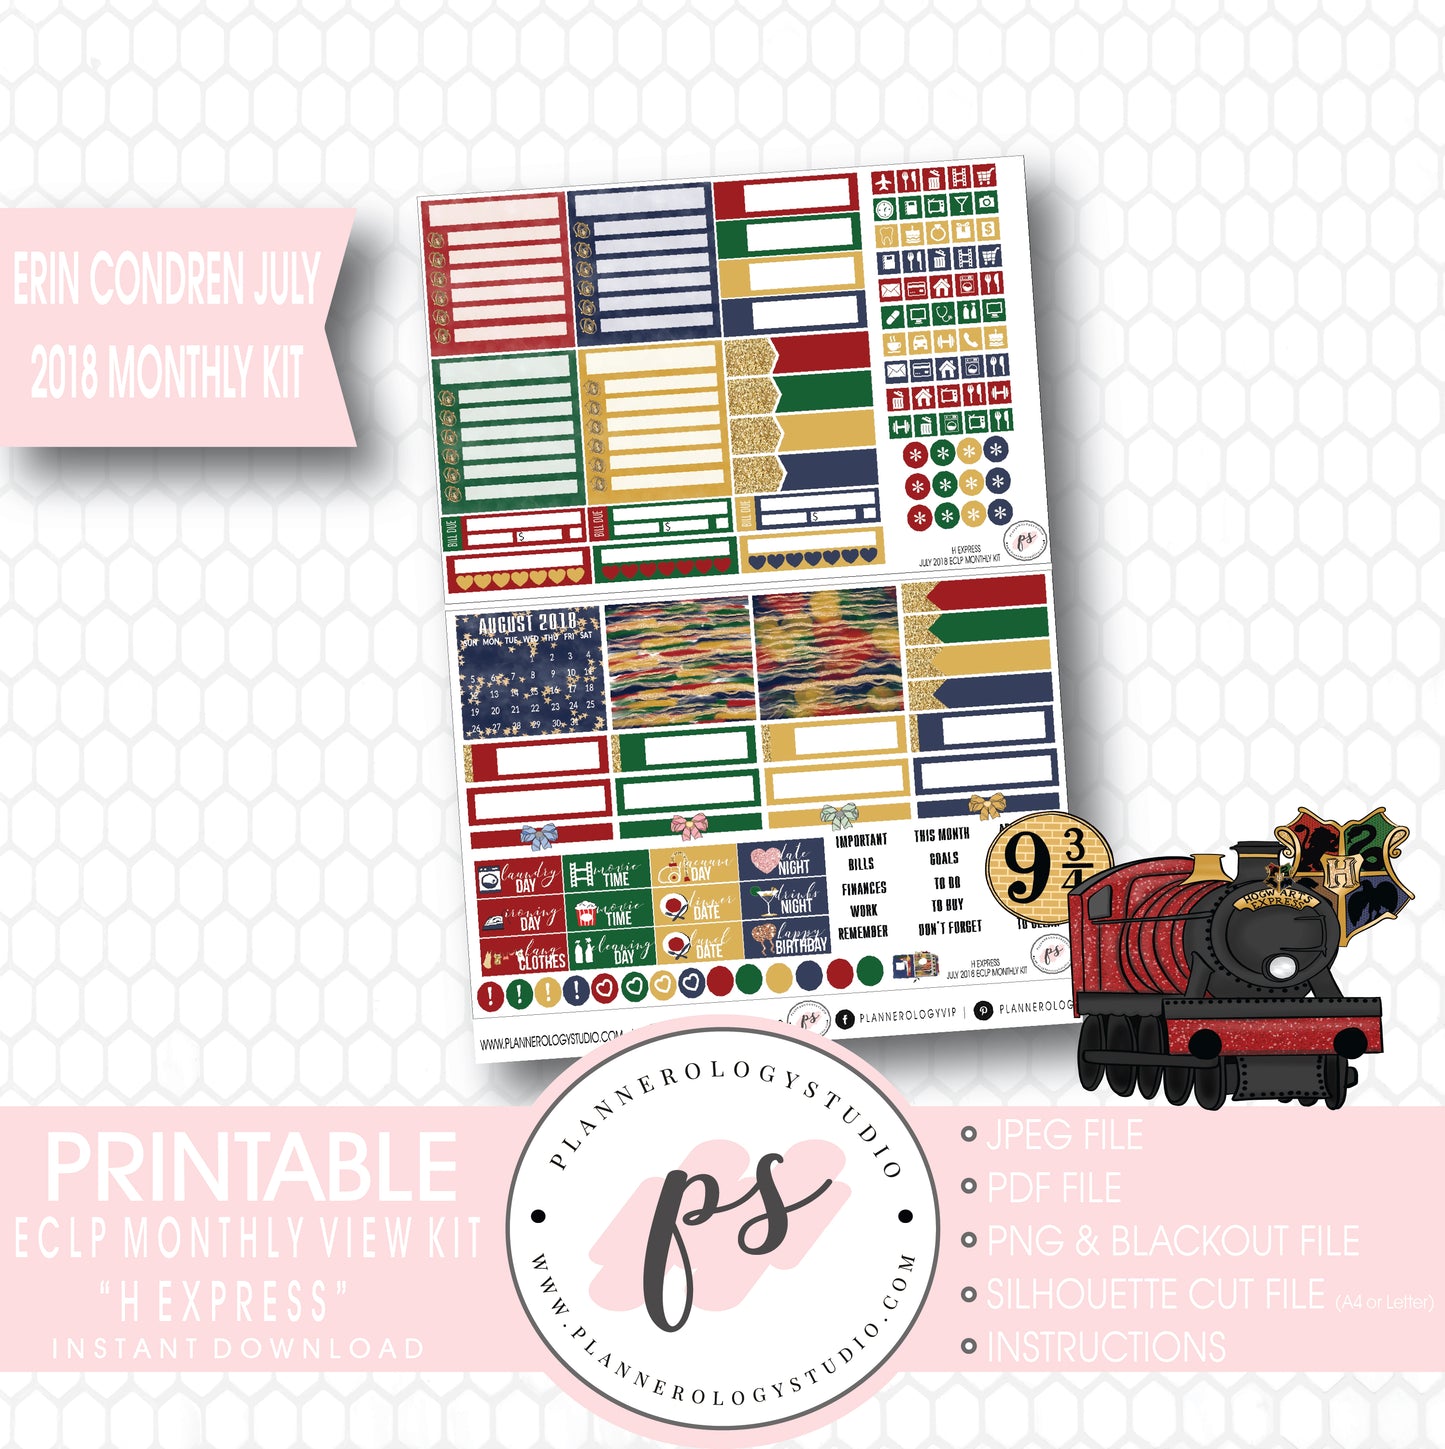 H Express (Harry Potter) July 2018 Monthly View Kit Digital Printable Planner Stickers (for use with Erin Condren) - Plannerologystudio